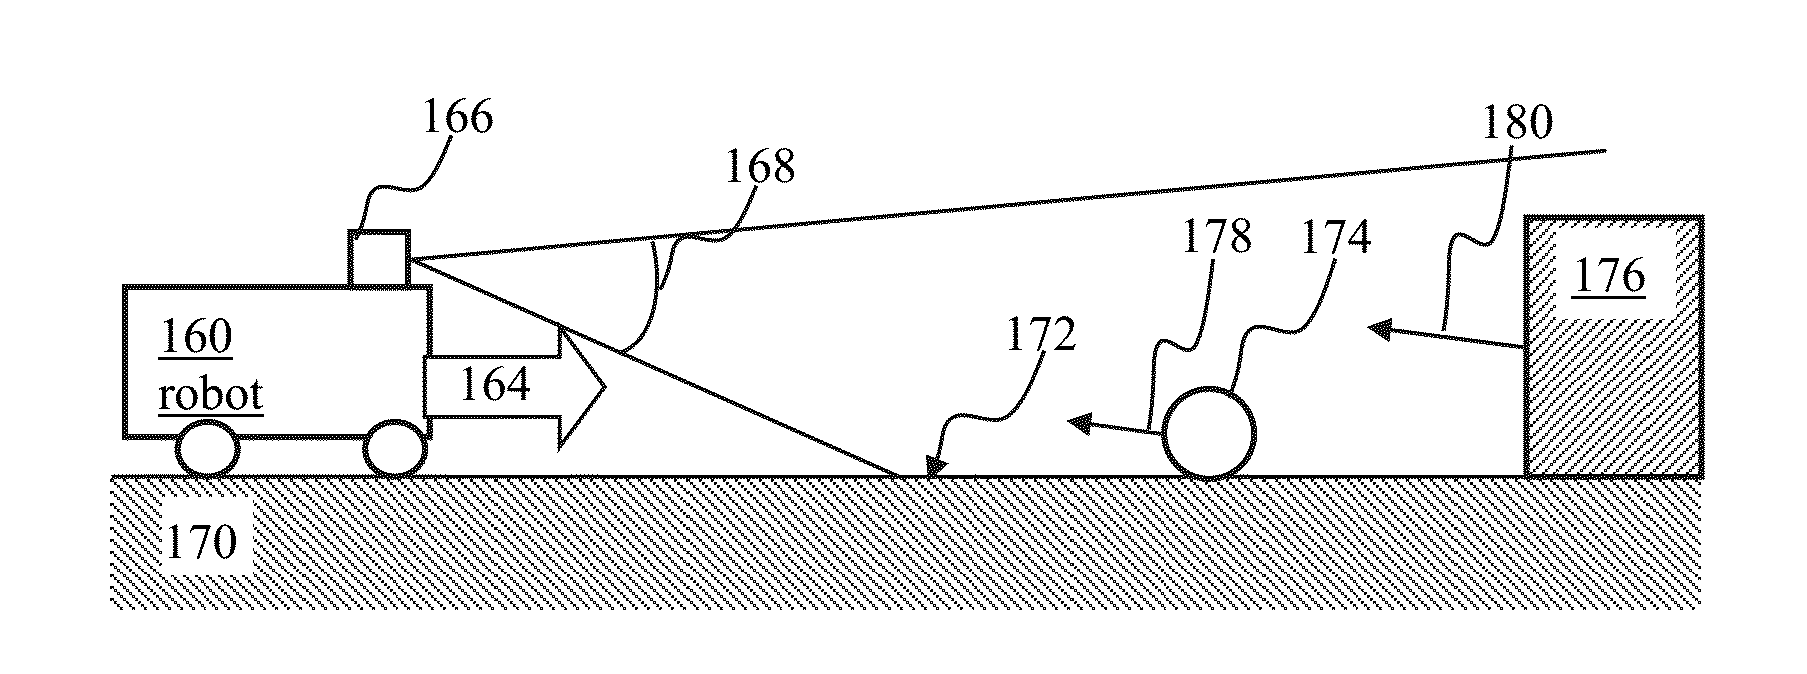 Apparatus and methods for training of robots